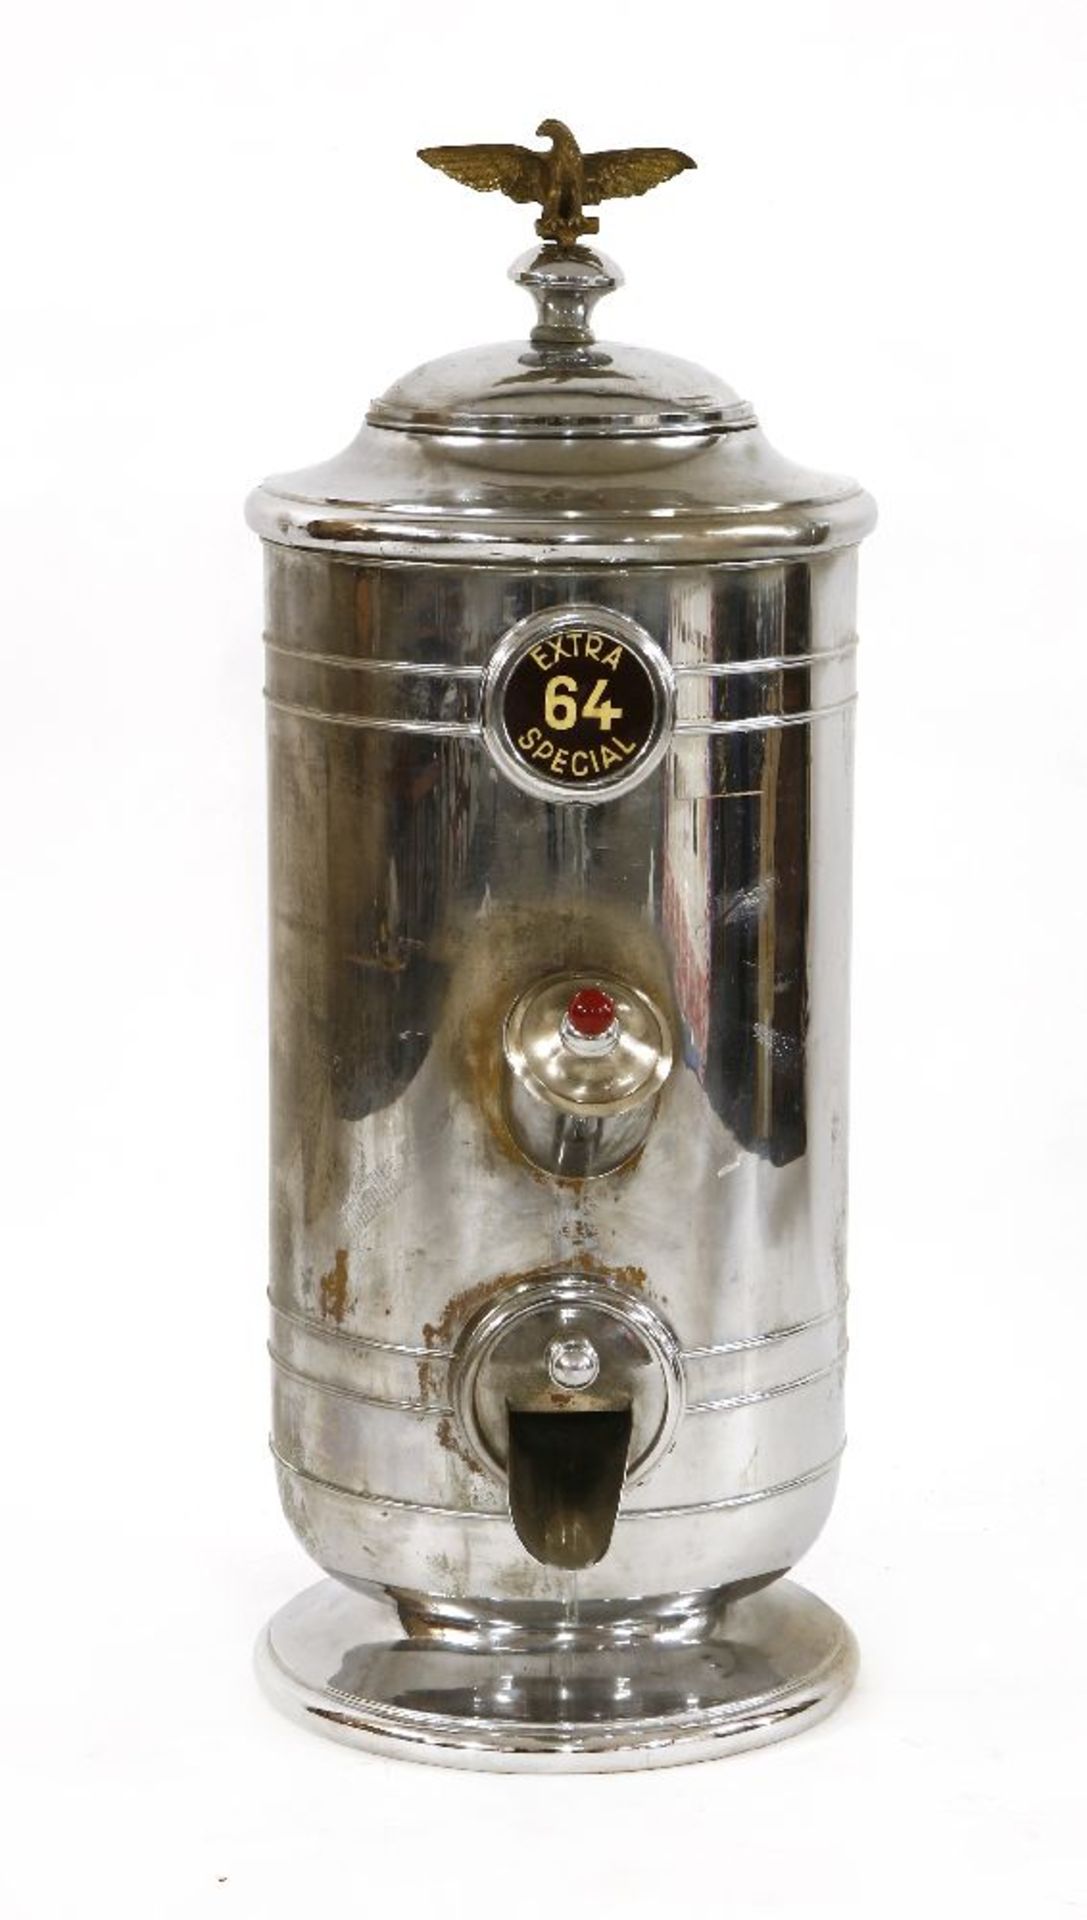 A COFFEE BEAN DISPENSER TOPPED BY A BRASS WINGED EAGLE,early 20th century, Belgian, nickel-silver,